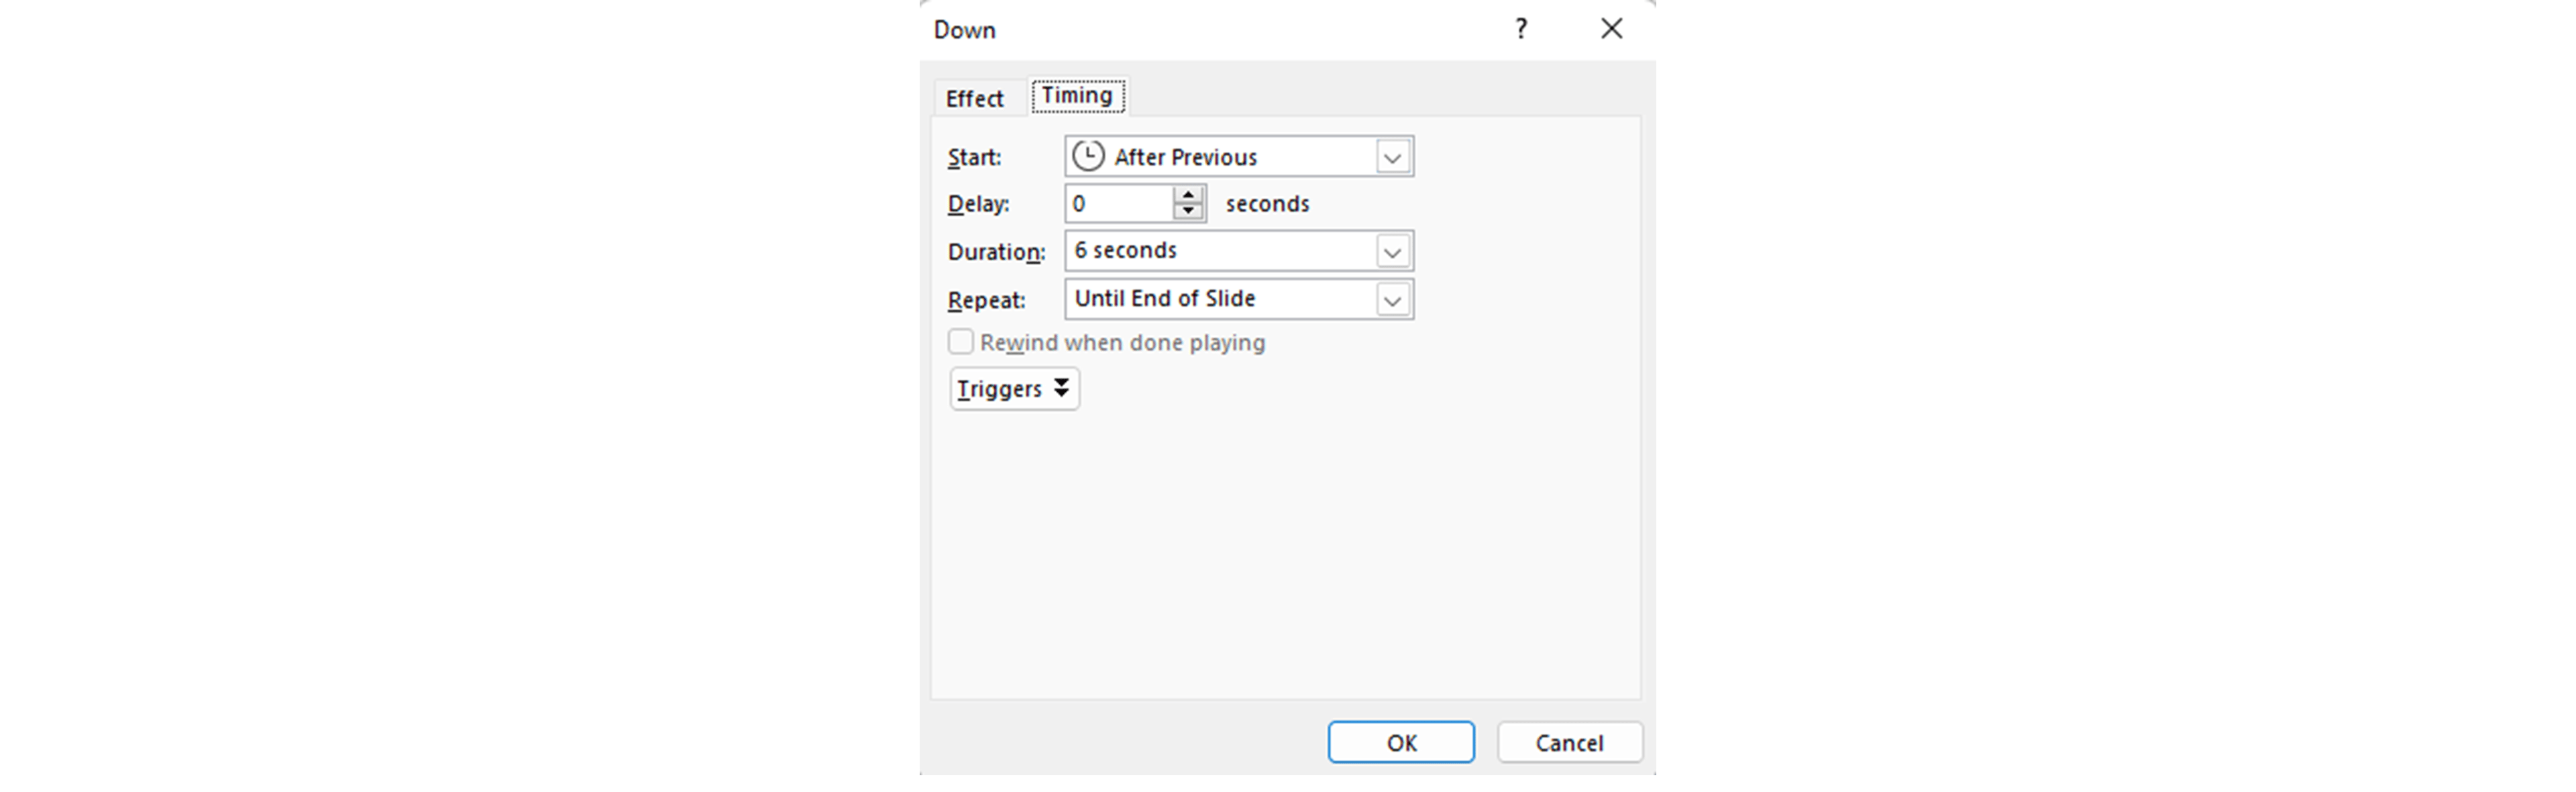 screenshot of the edit animation pop up window showing the settings described above.